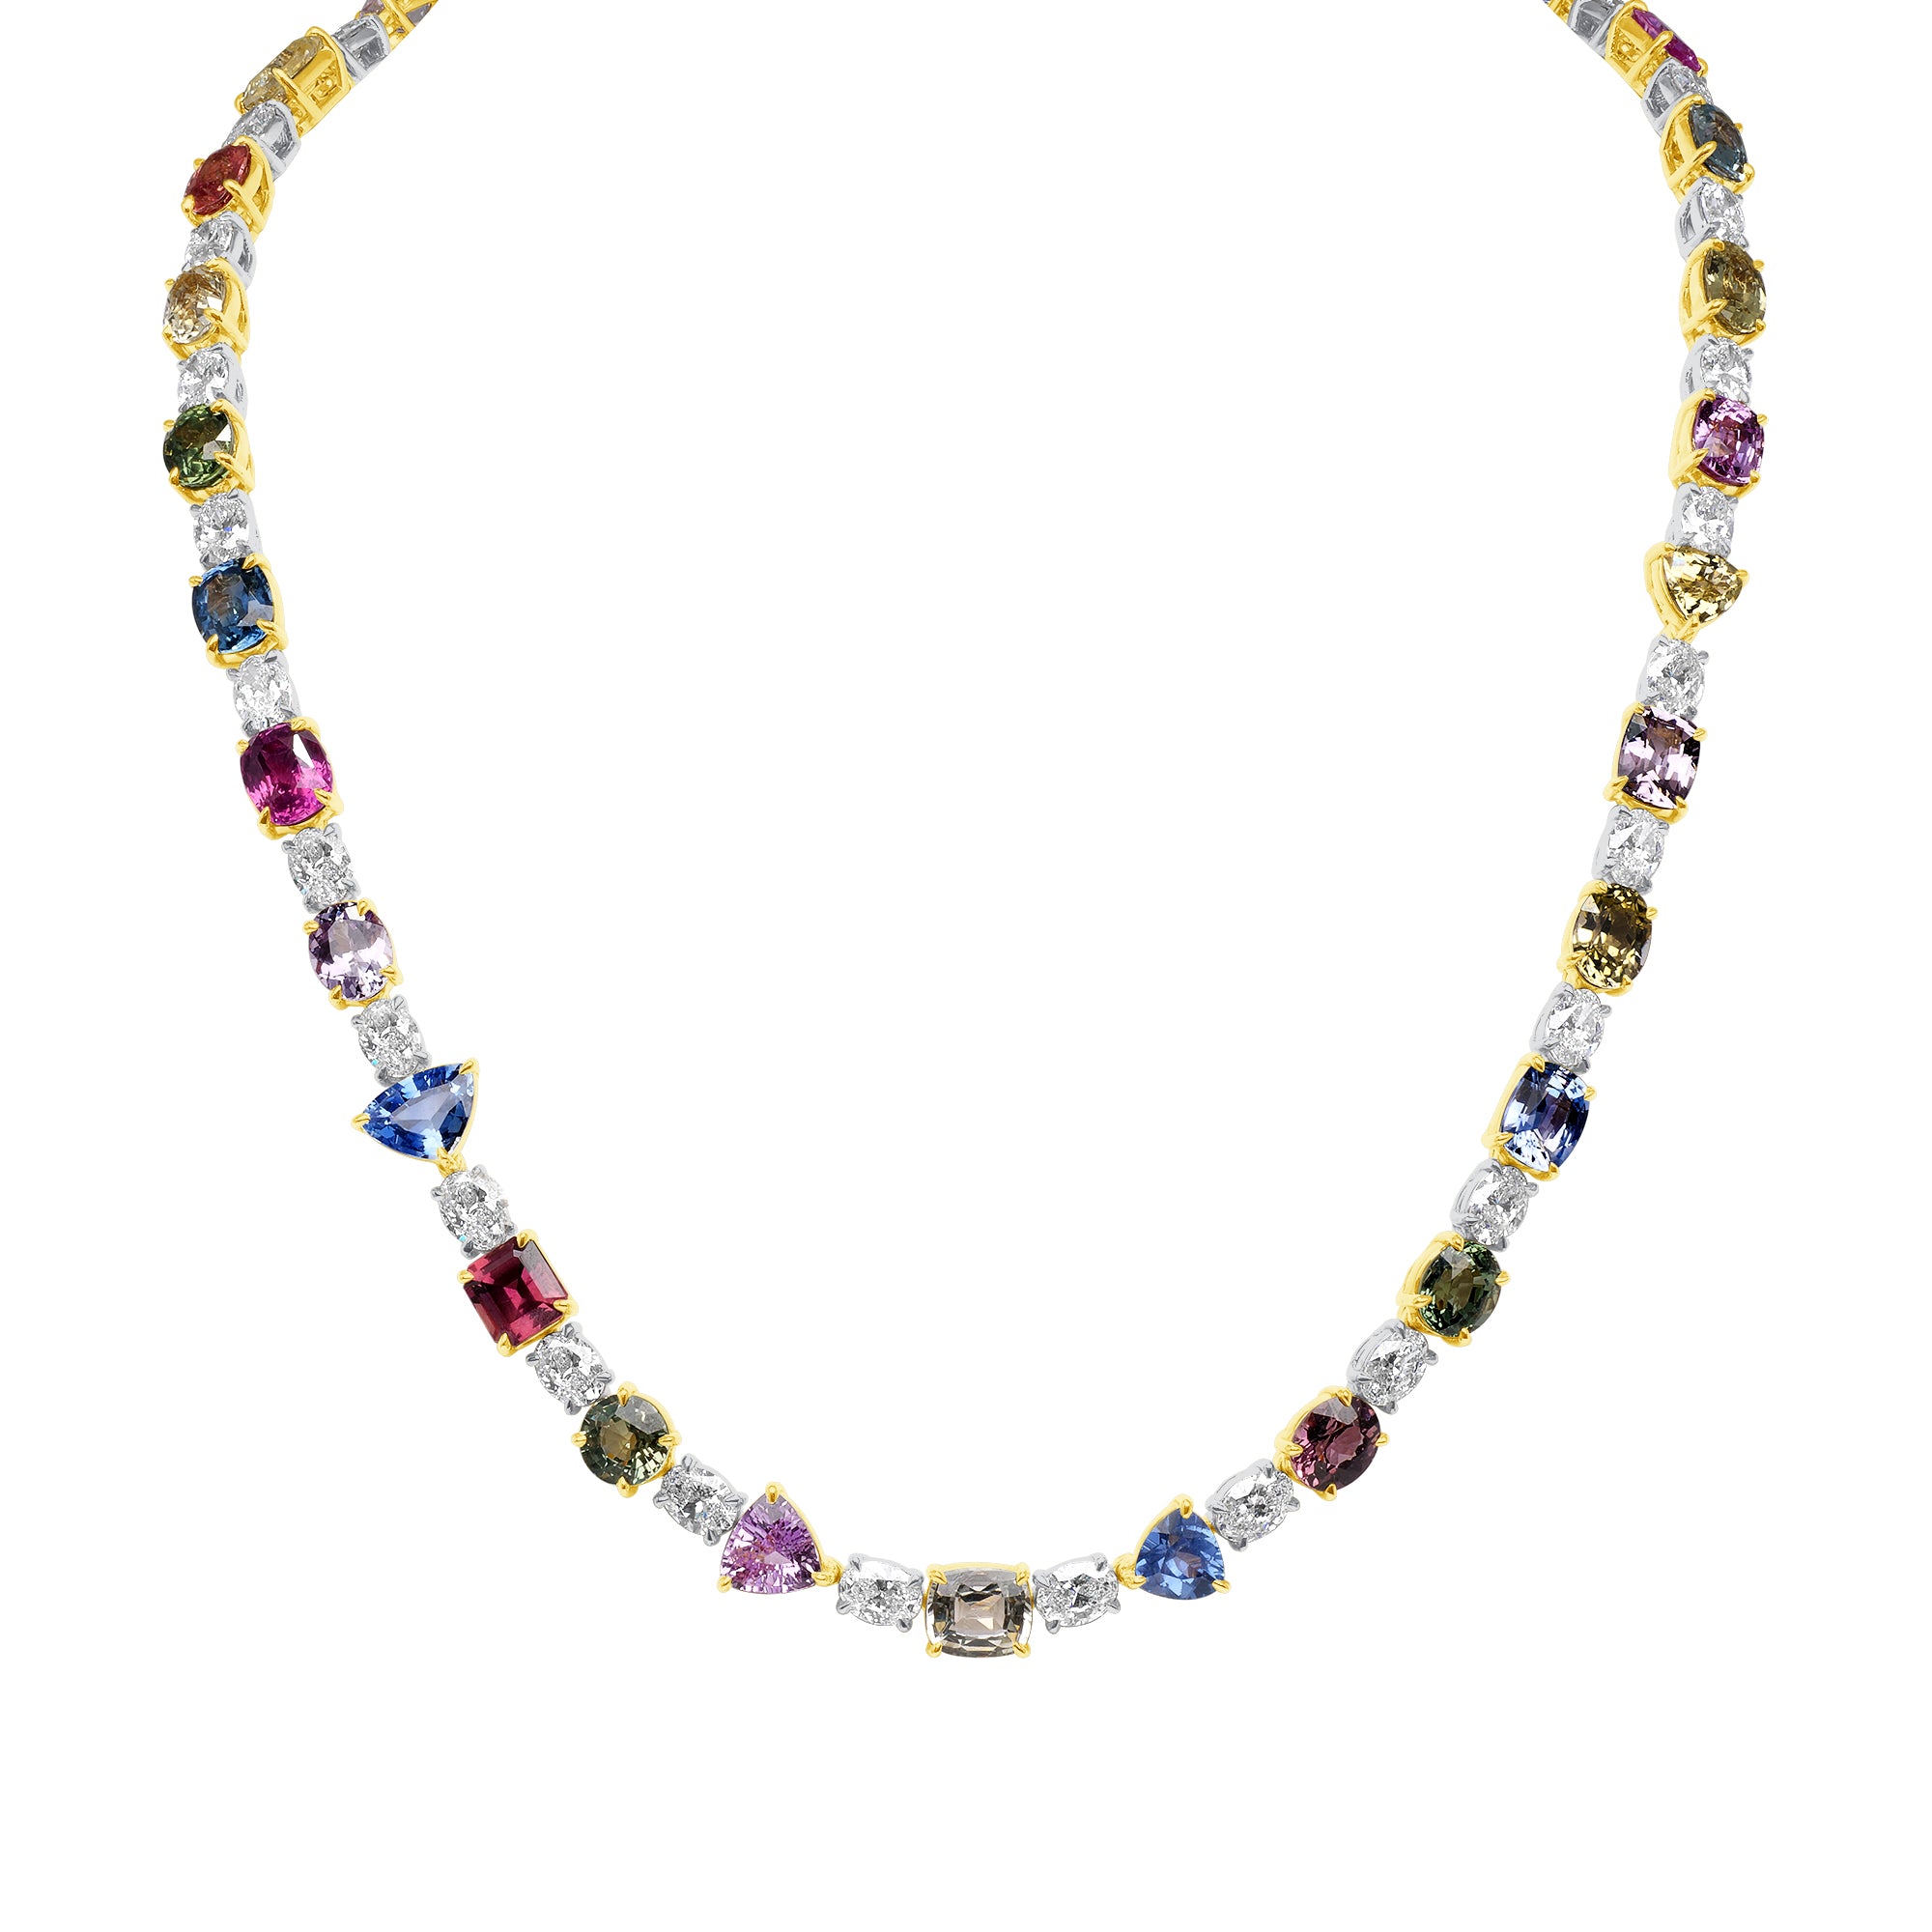 53.06 CT. Fancy Shape Sapphire and Oval Cut Diamond Tennis Necklace in 18K White Gold and Yellow Gold